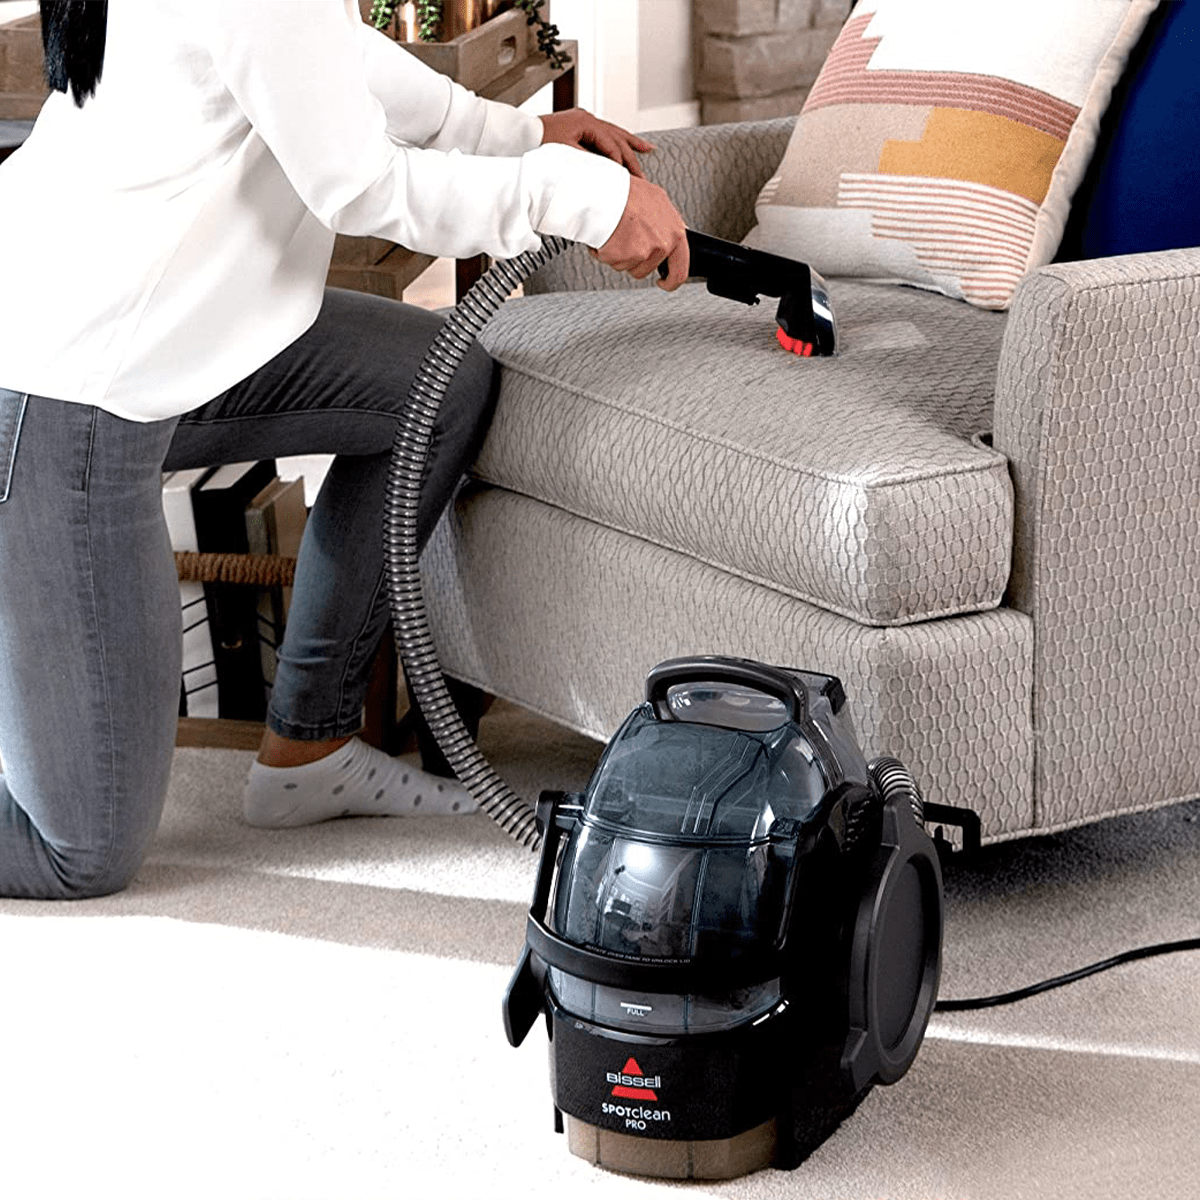 The Best Carpet Cleaning Machines for Your Home